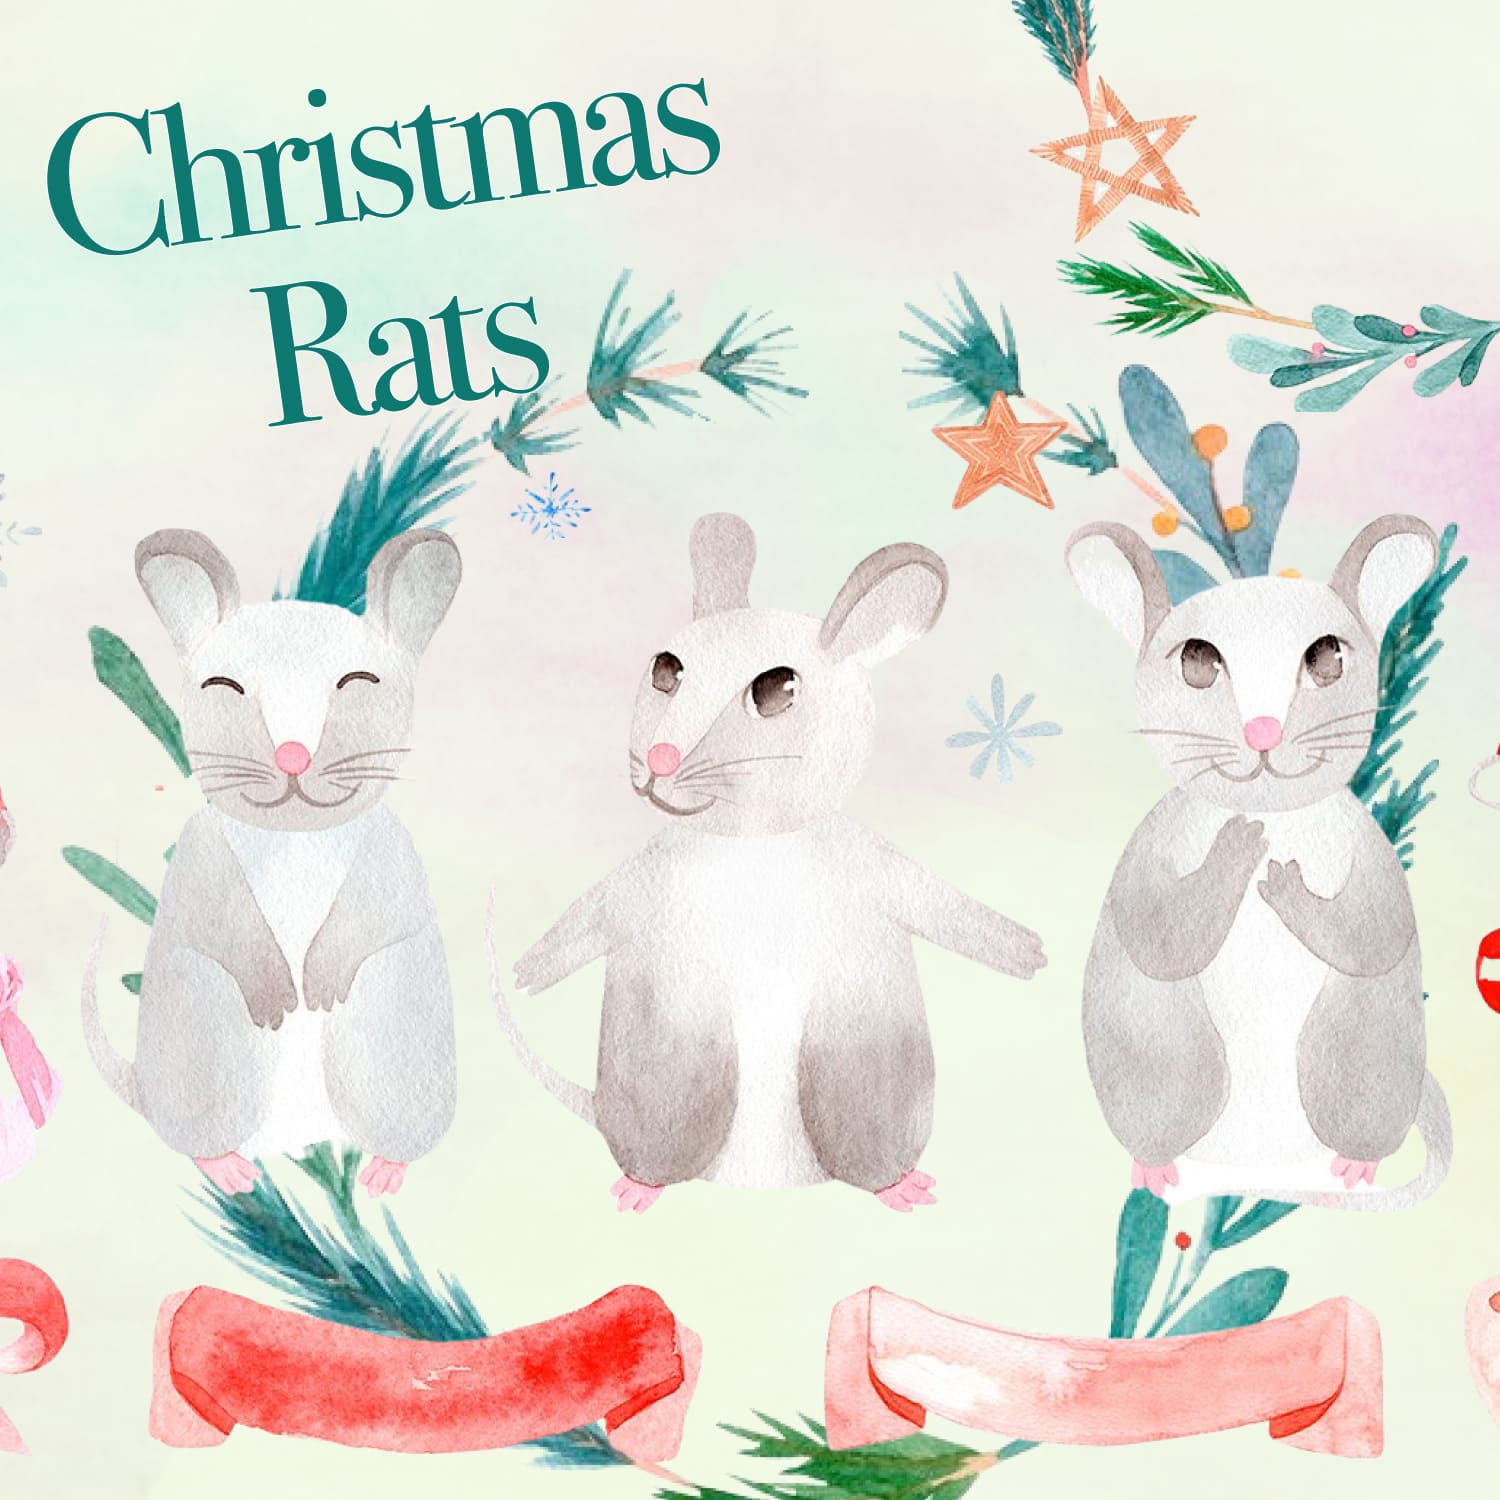 Collection of hand-drawn watercolor Christmas Rats.